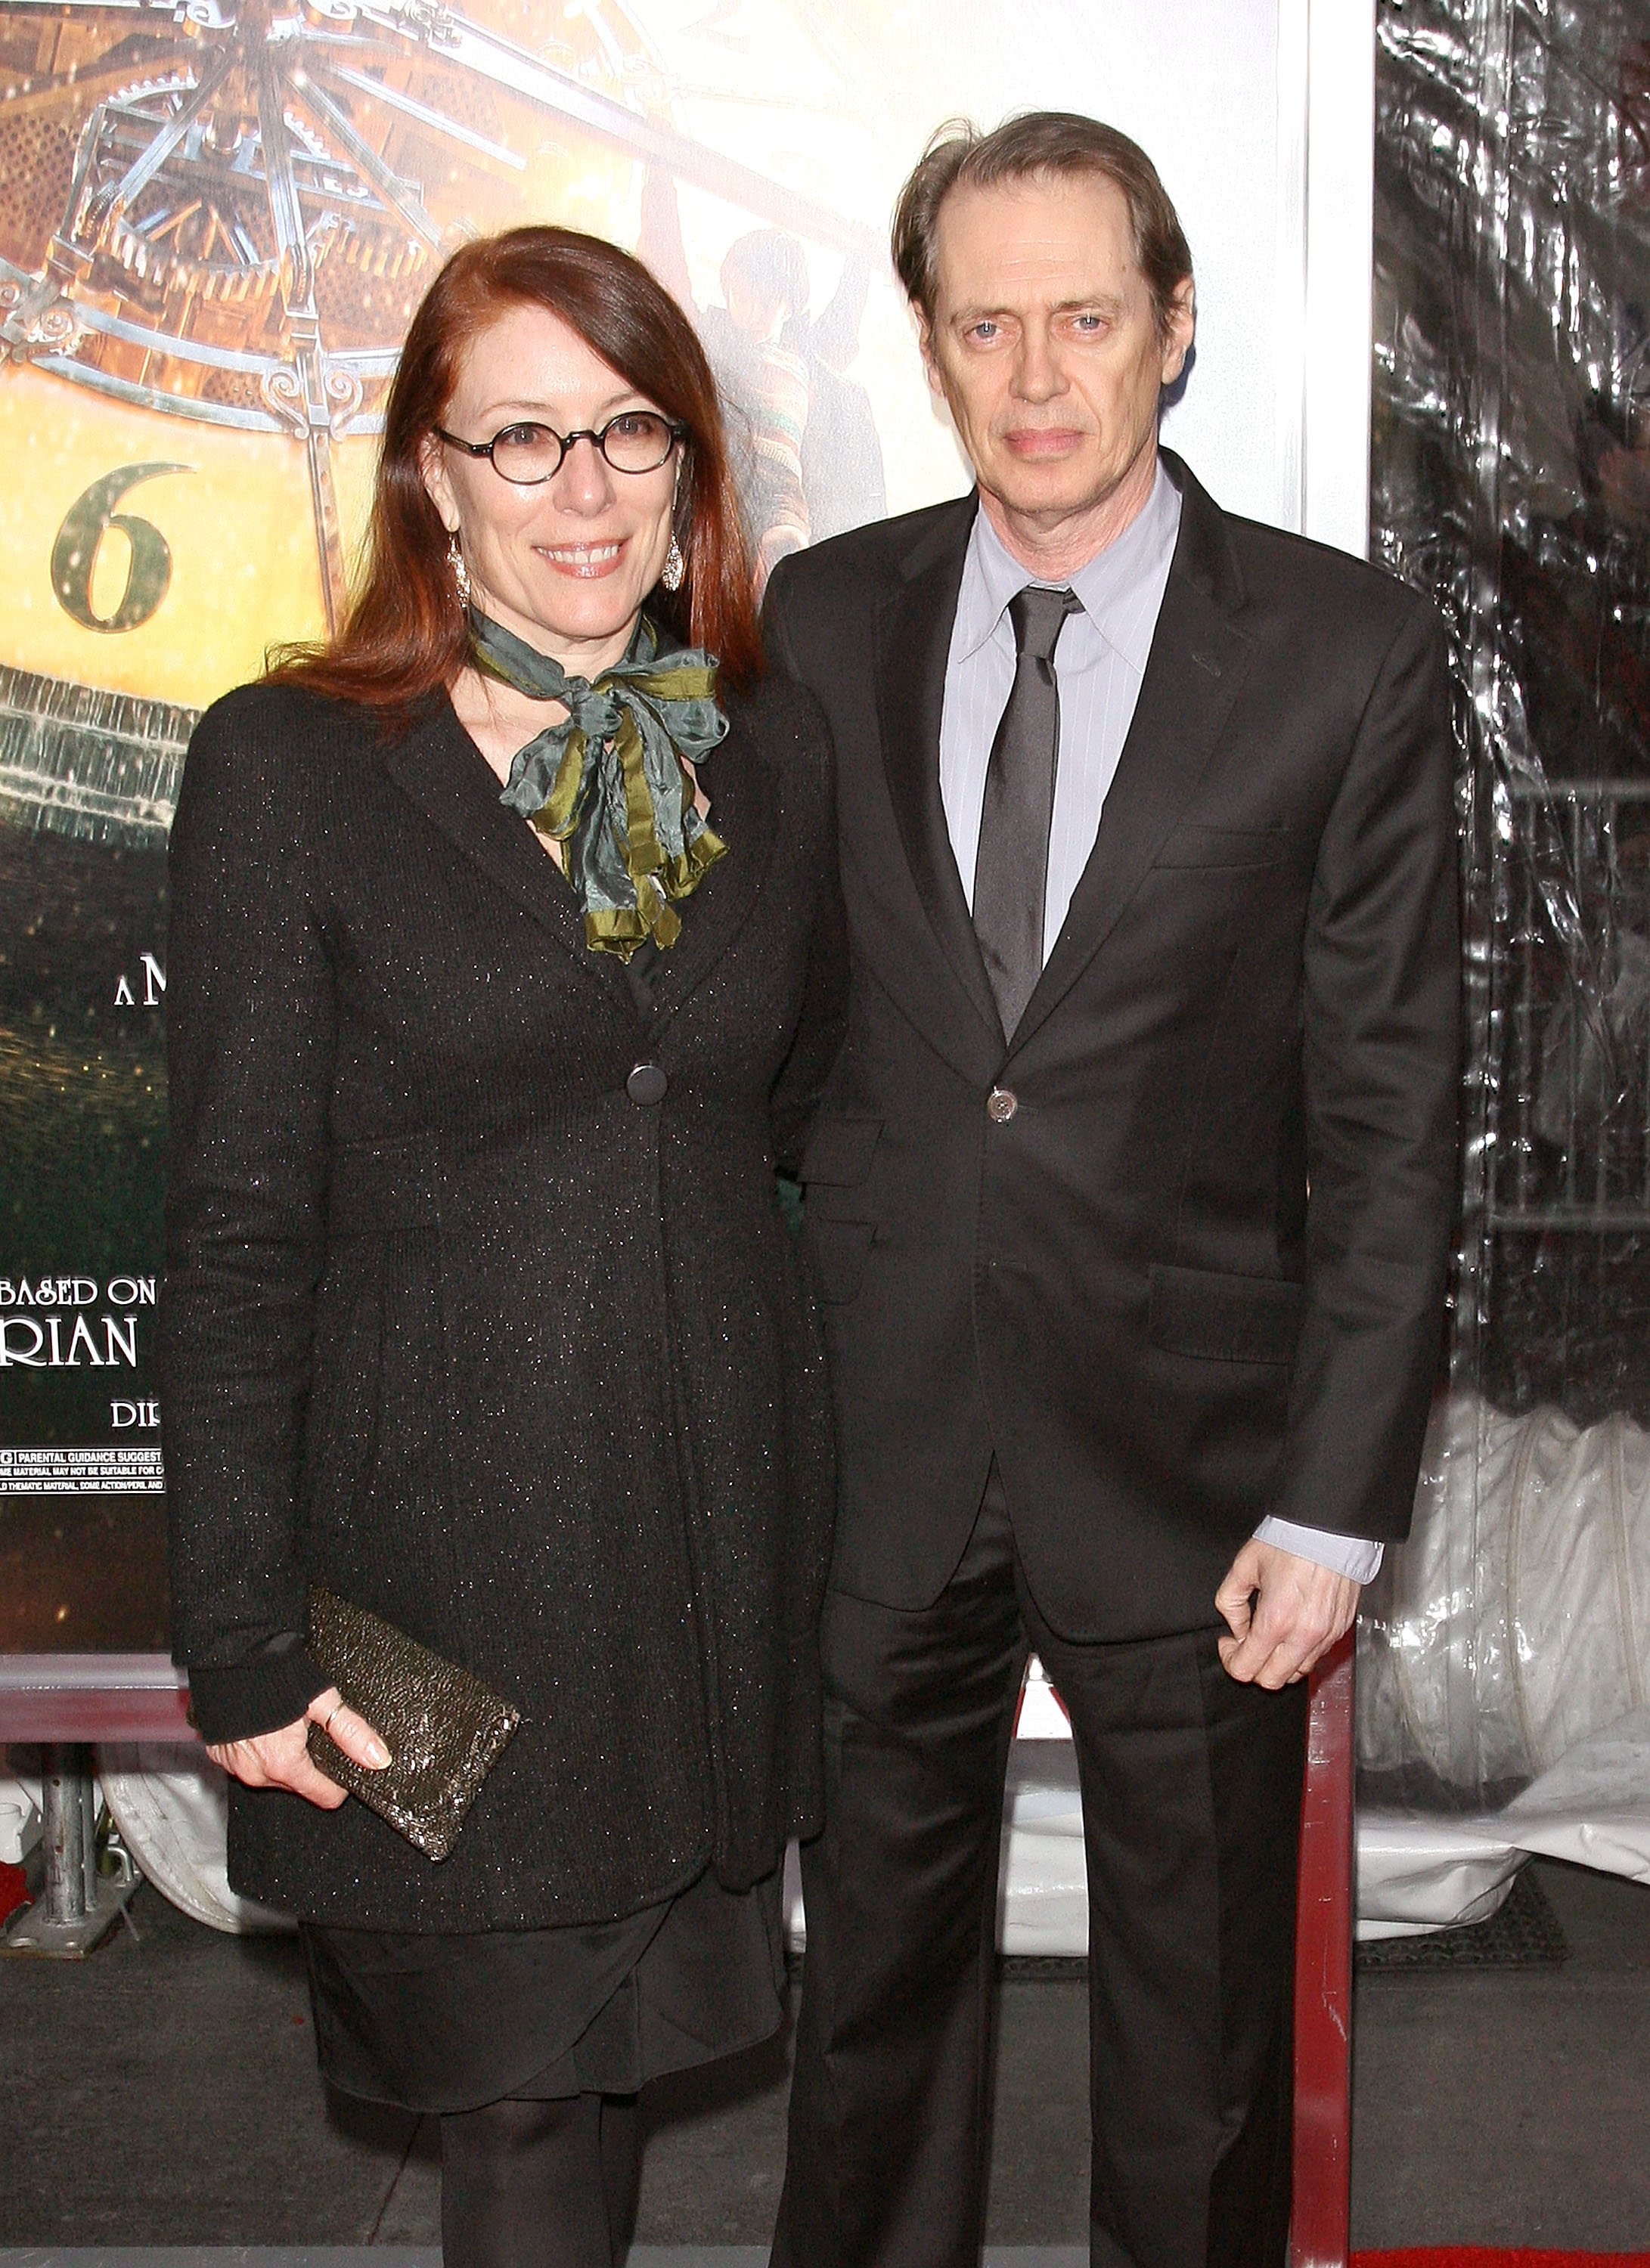 Steve Buscemi and Jo Andres attend the "Hugo" premiere in New York City on November 21, 2011 | Source: Getty Images